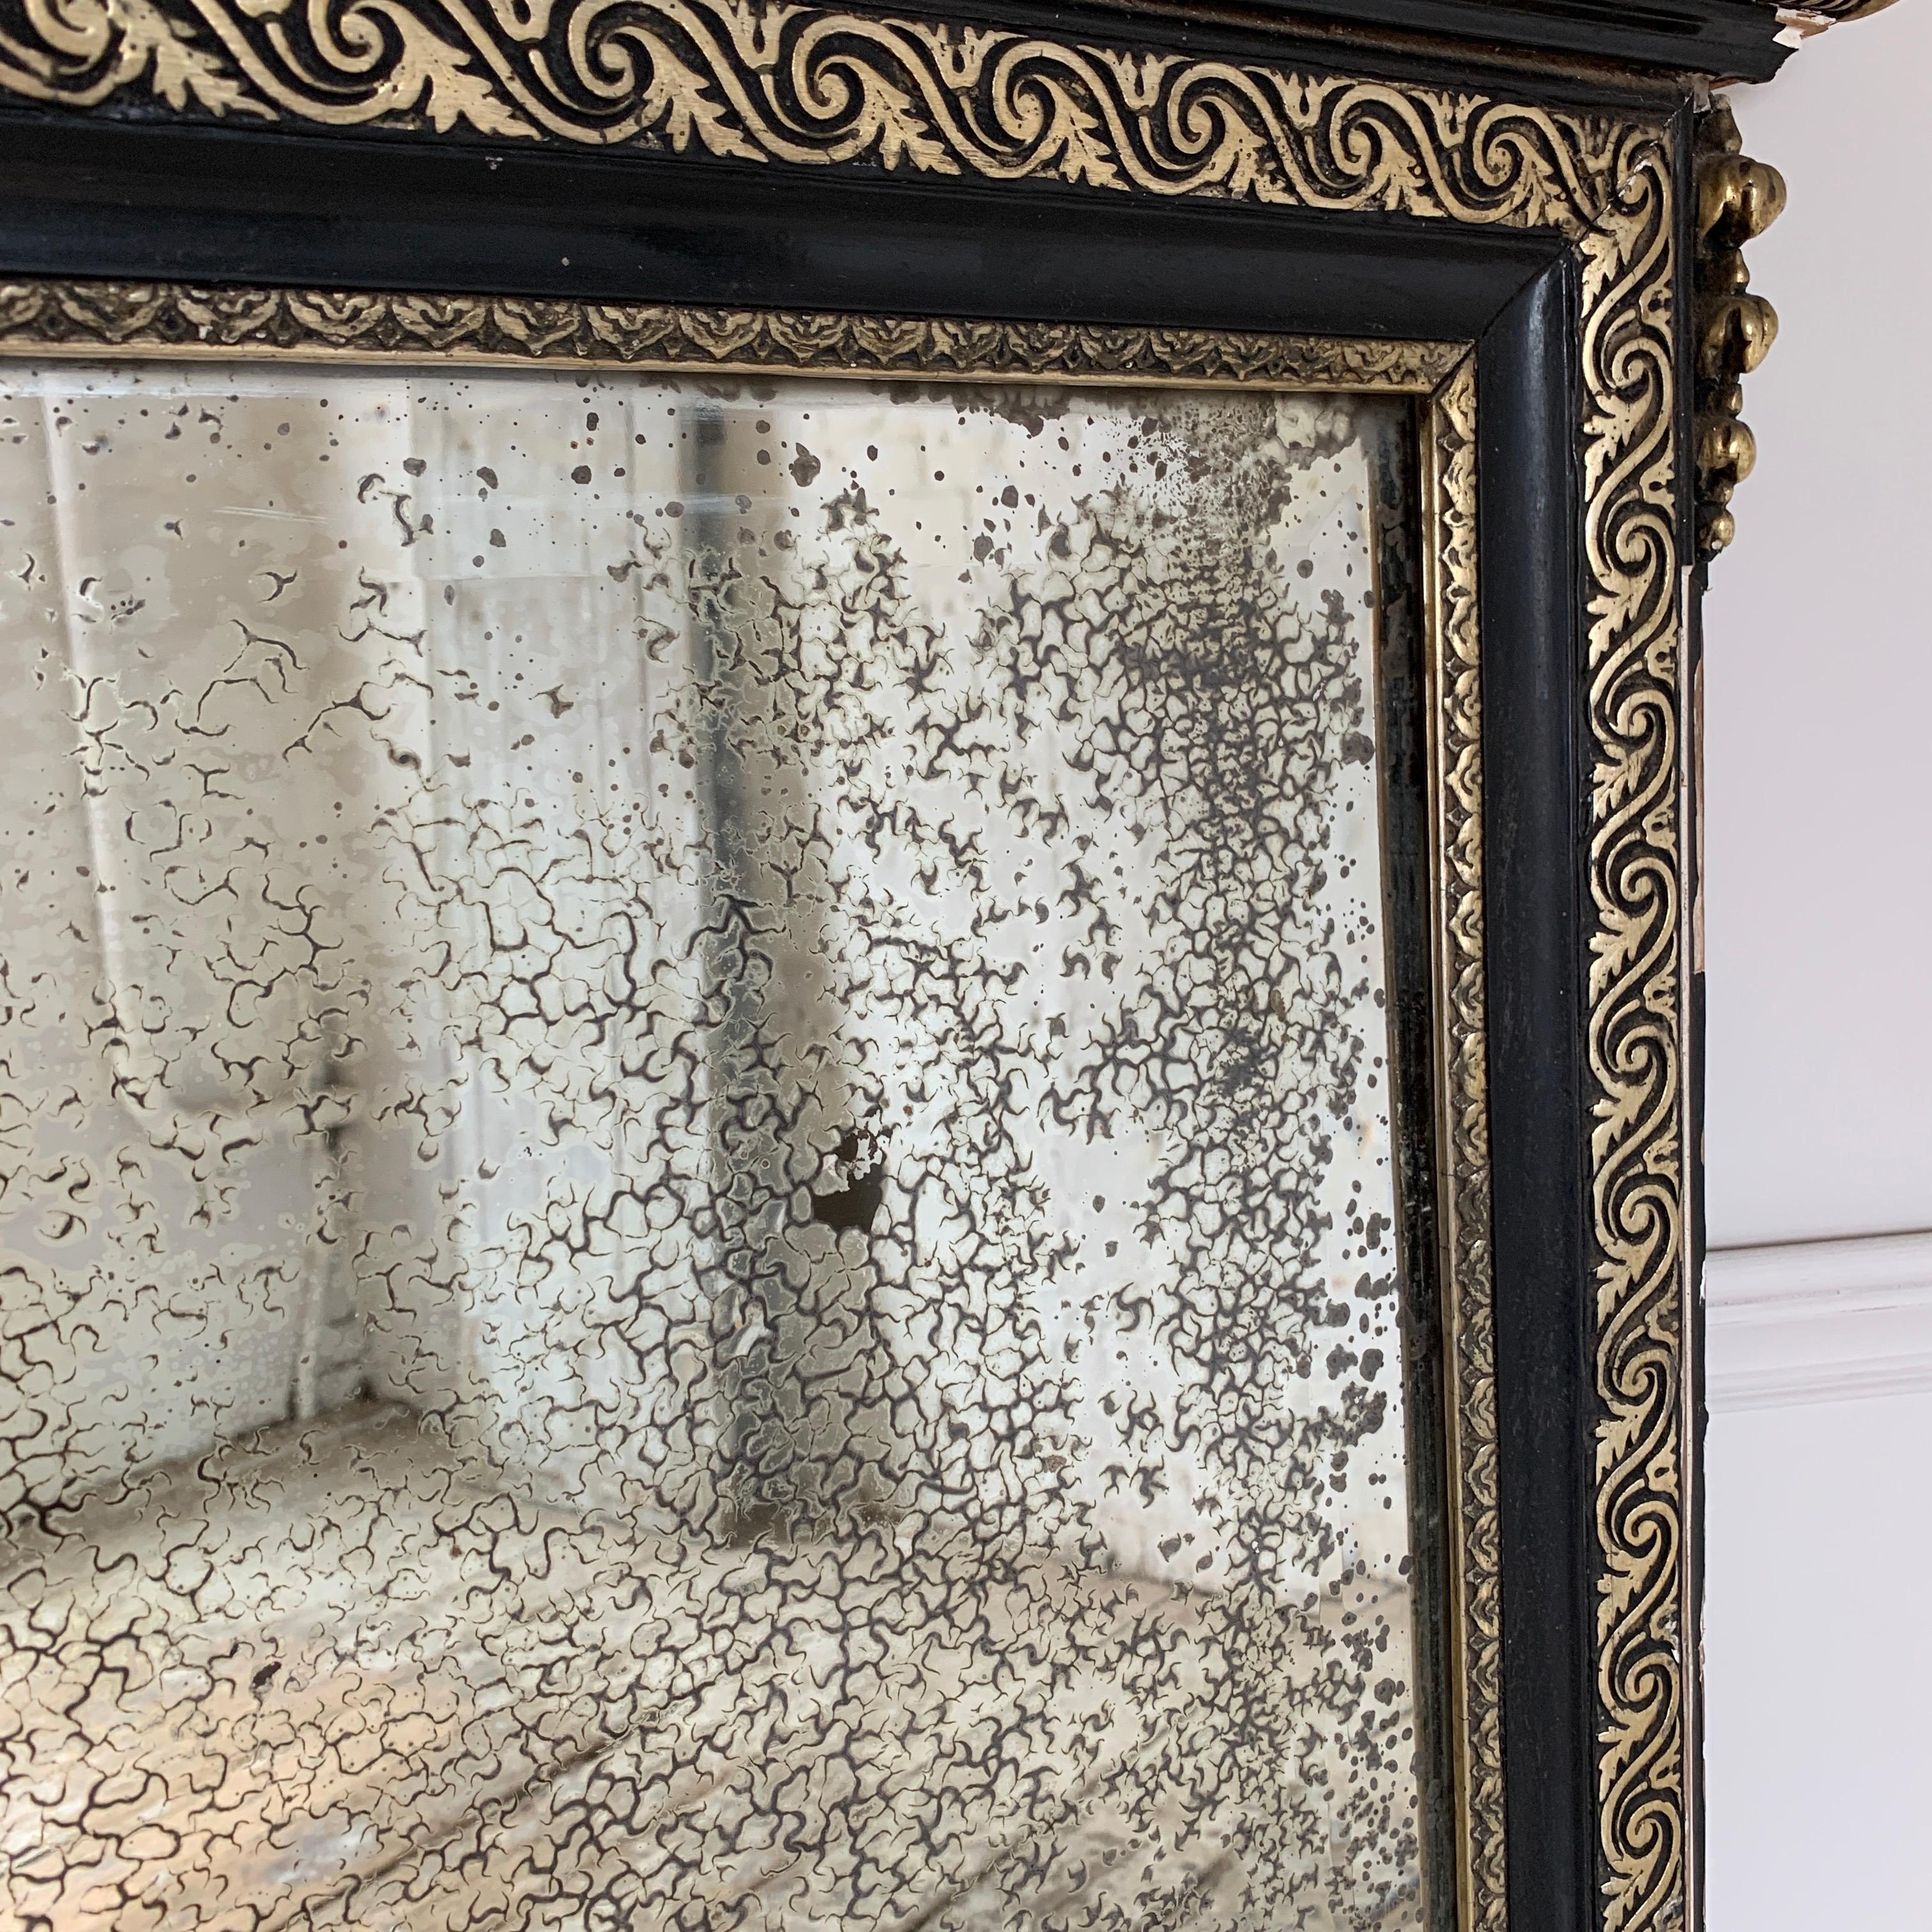 Stunning large Victorian mantle mirror
French, circa 1800s
130cm height, 113cm width, 7 depth. Mirror size, 99cm height, 94cm width
The mirror is silver backed dating late 1800s
Bevelled glass
The mirror is very heavily foxed in the most